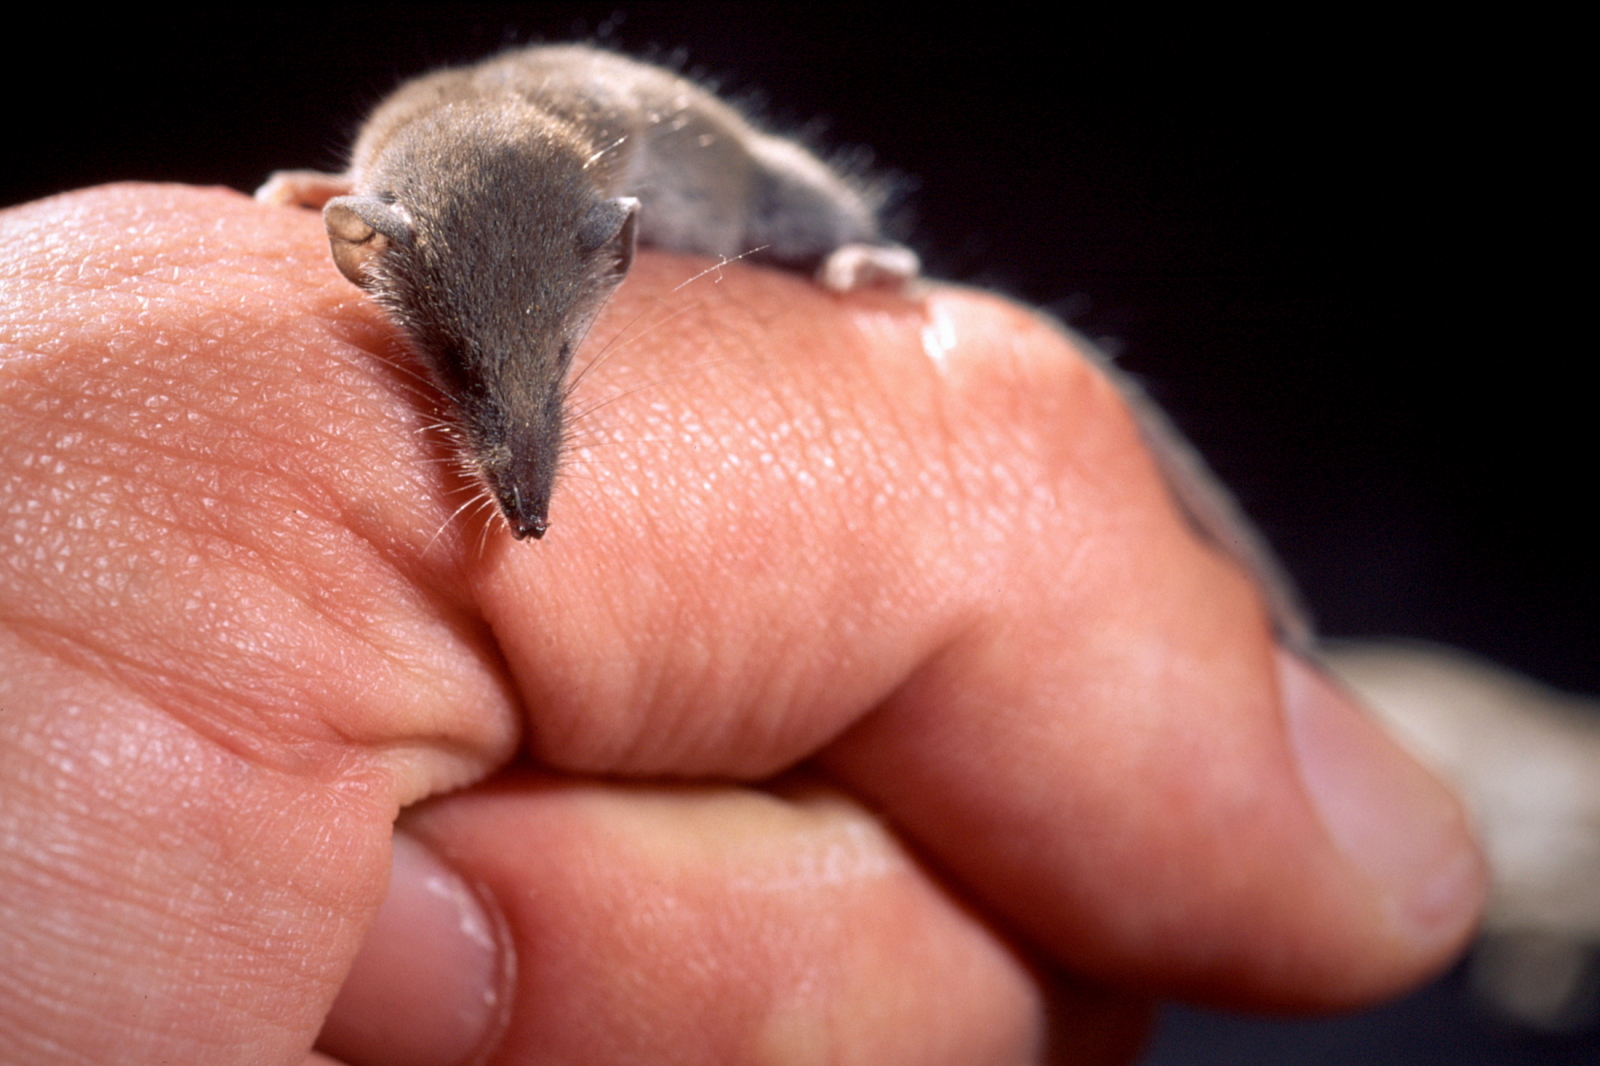 What is the smallest mammal animal in the world?